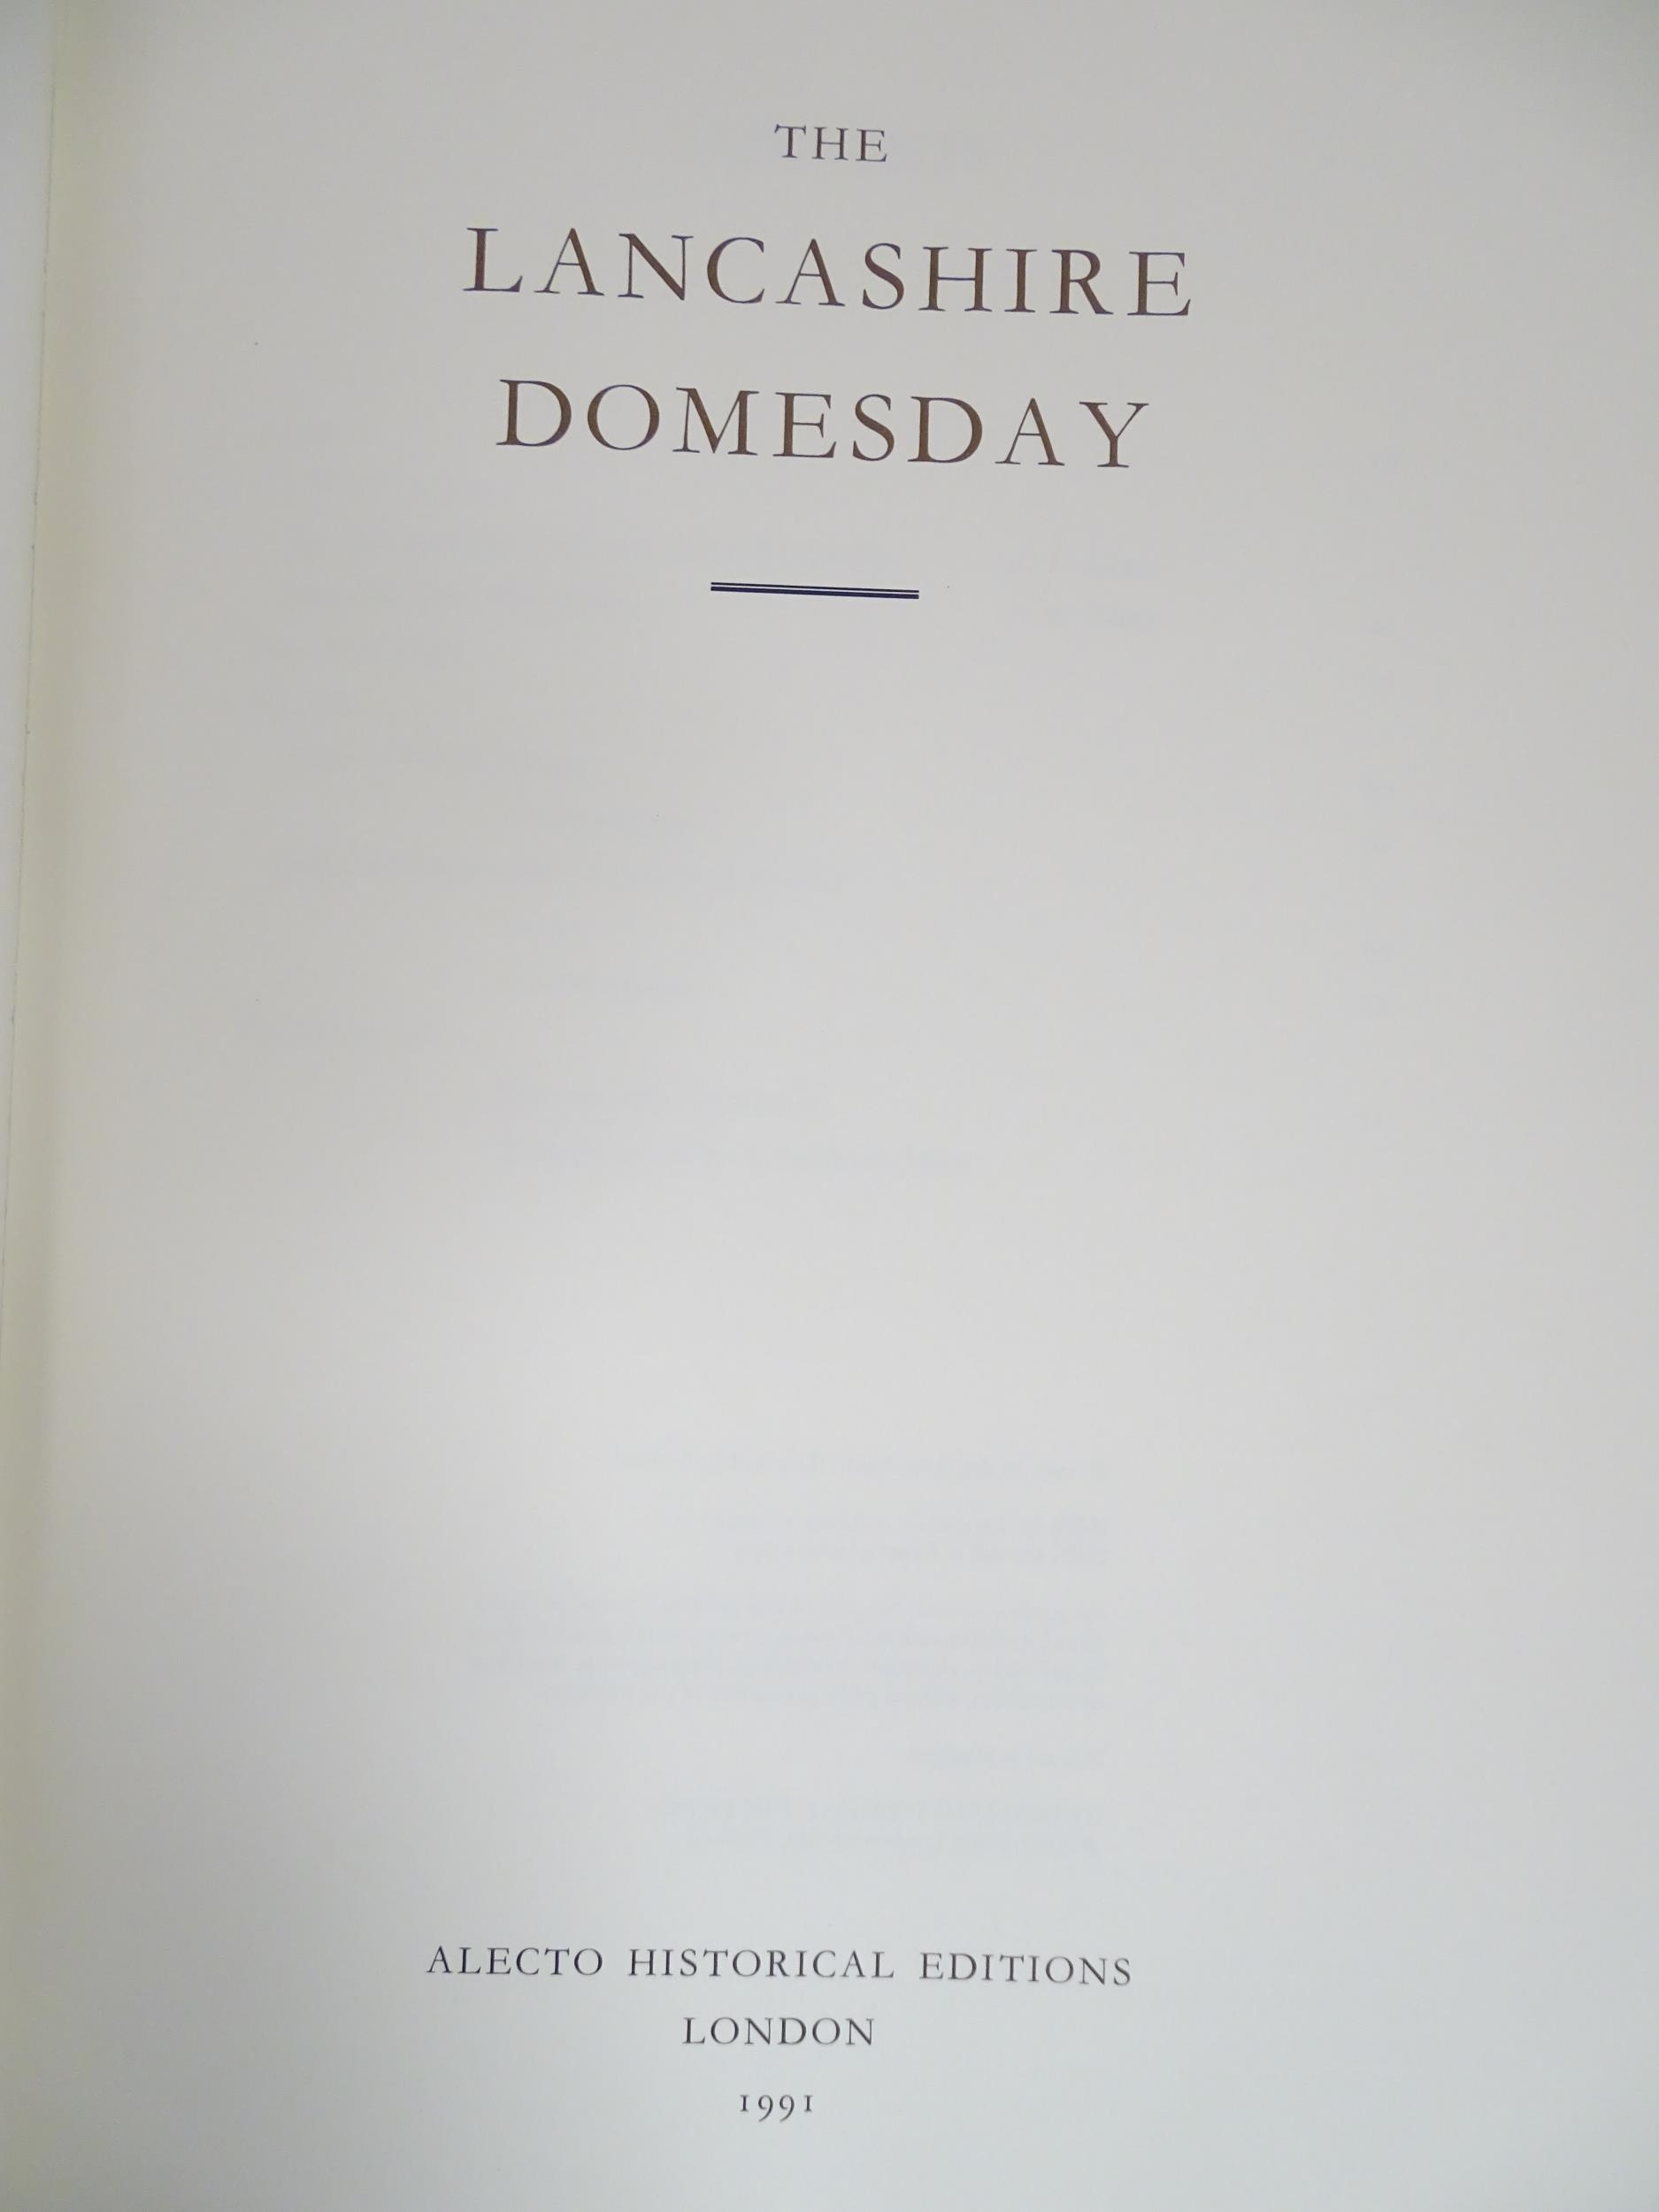 Books: The Lancashire Domesday, comprising Introduction & Translation, Studies, and Folios & Maps. - Image 9 of 15